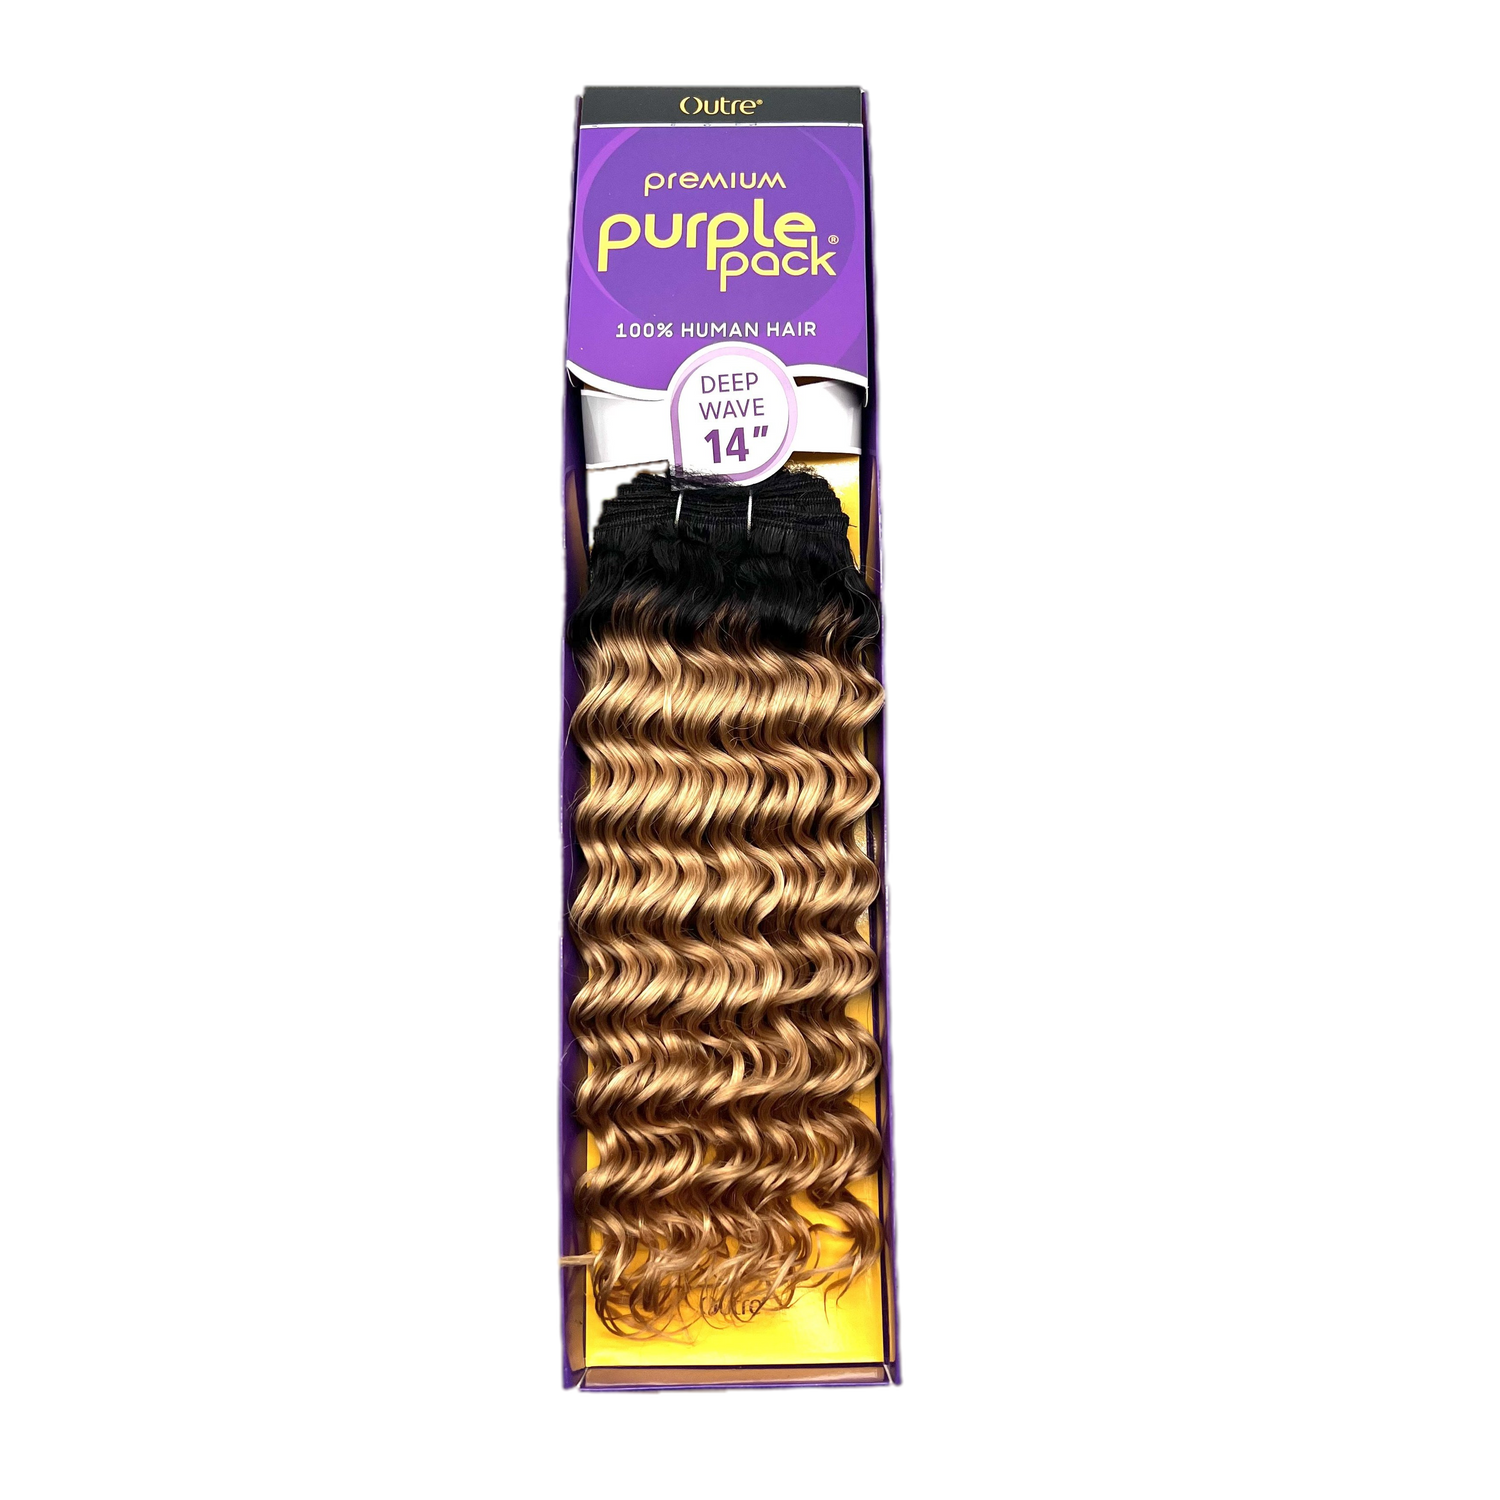 Outre Premium Purple Pack 100% Human Hair For Weaving Deep Wave - VIP Extensions